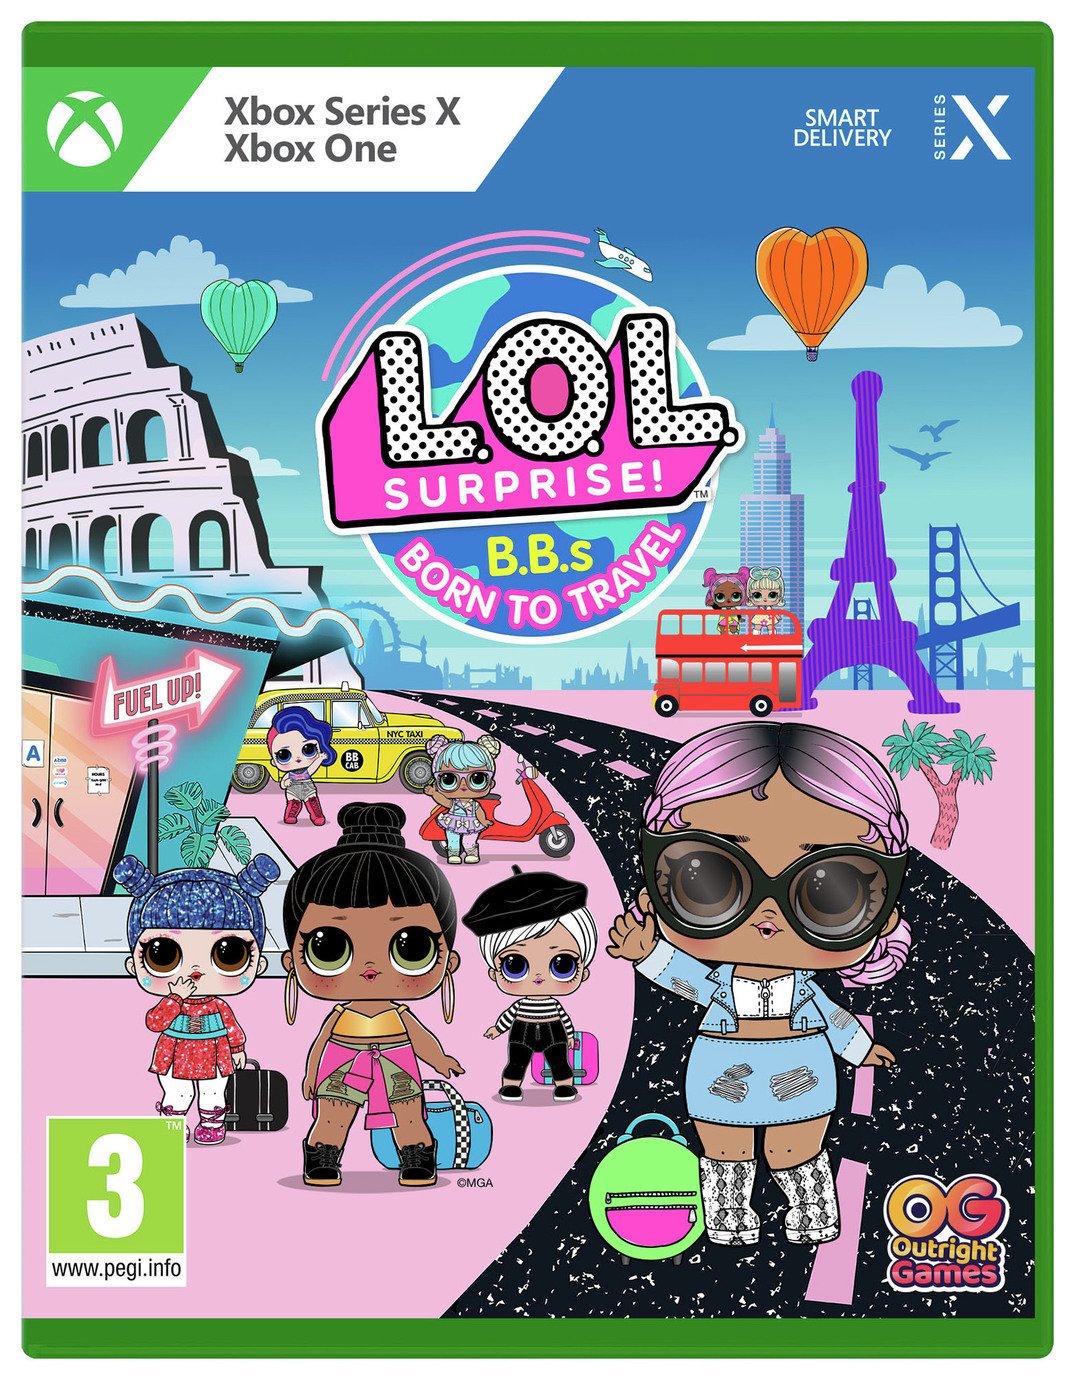 L.O.L. Surprise! B.B.s Born To Travel Xbox One/Series X Game